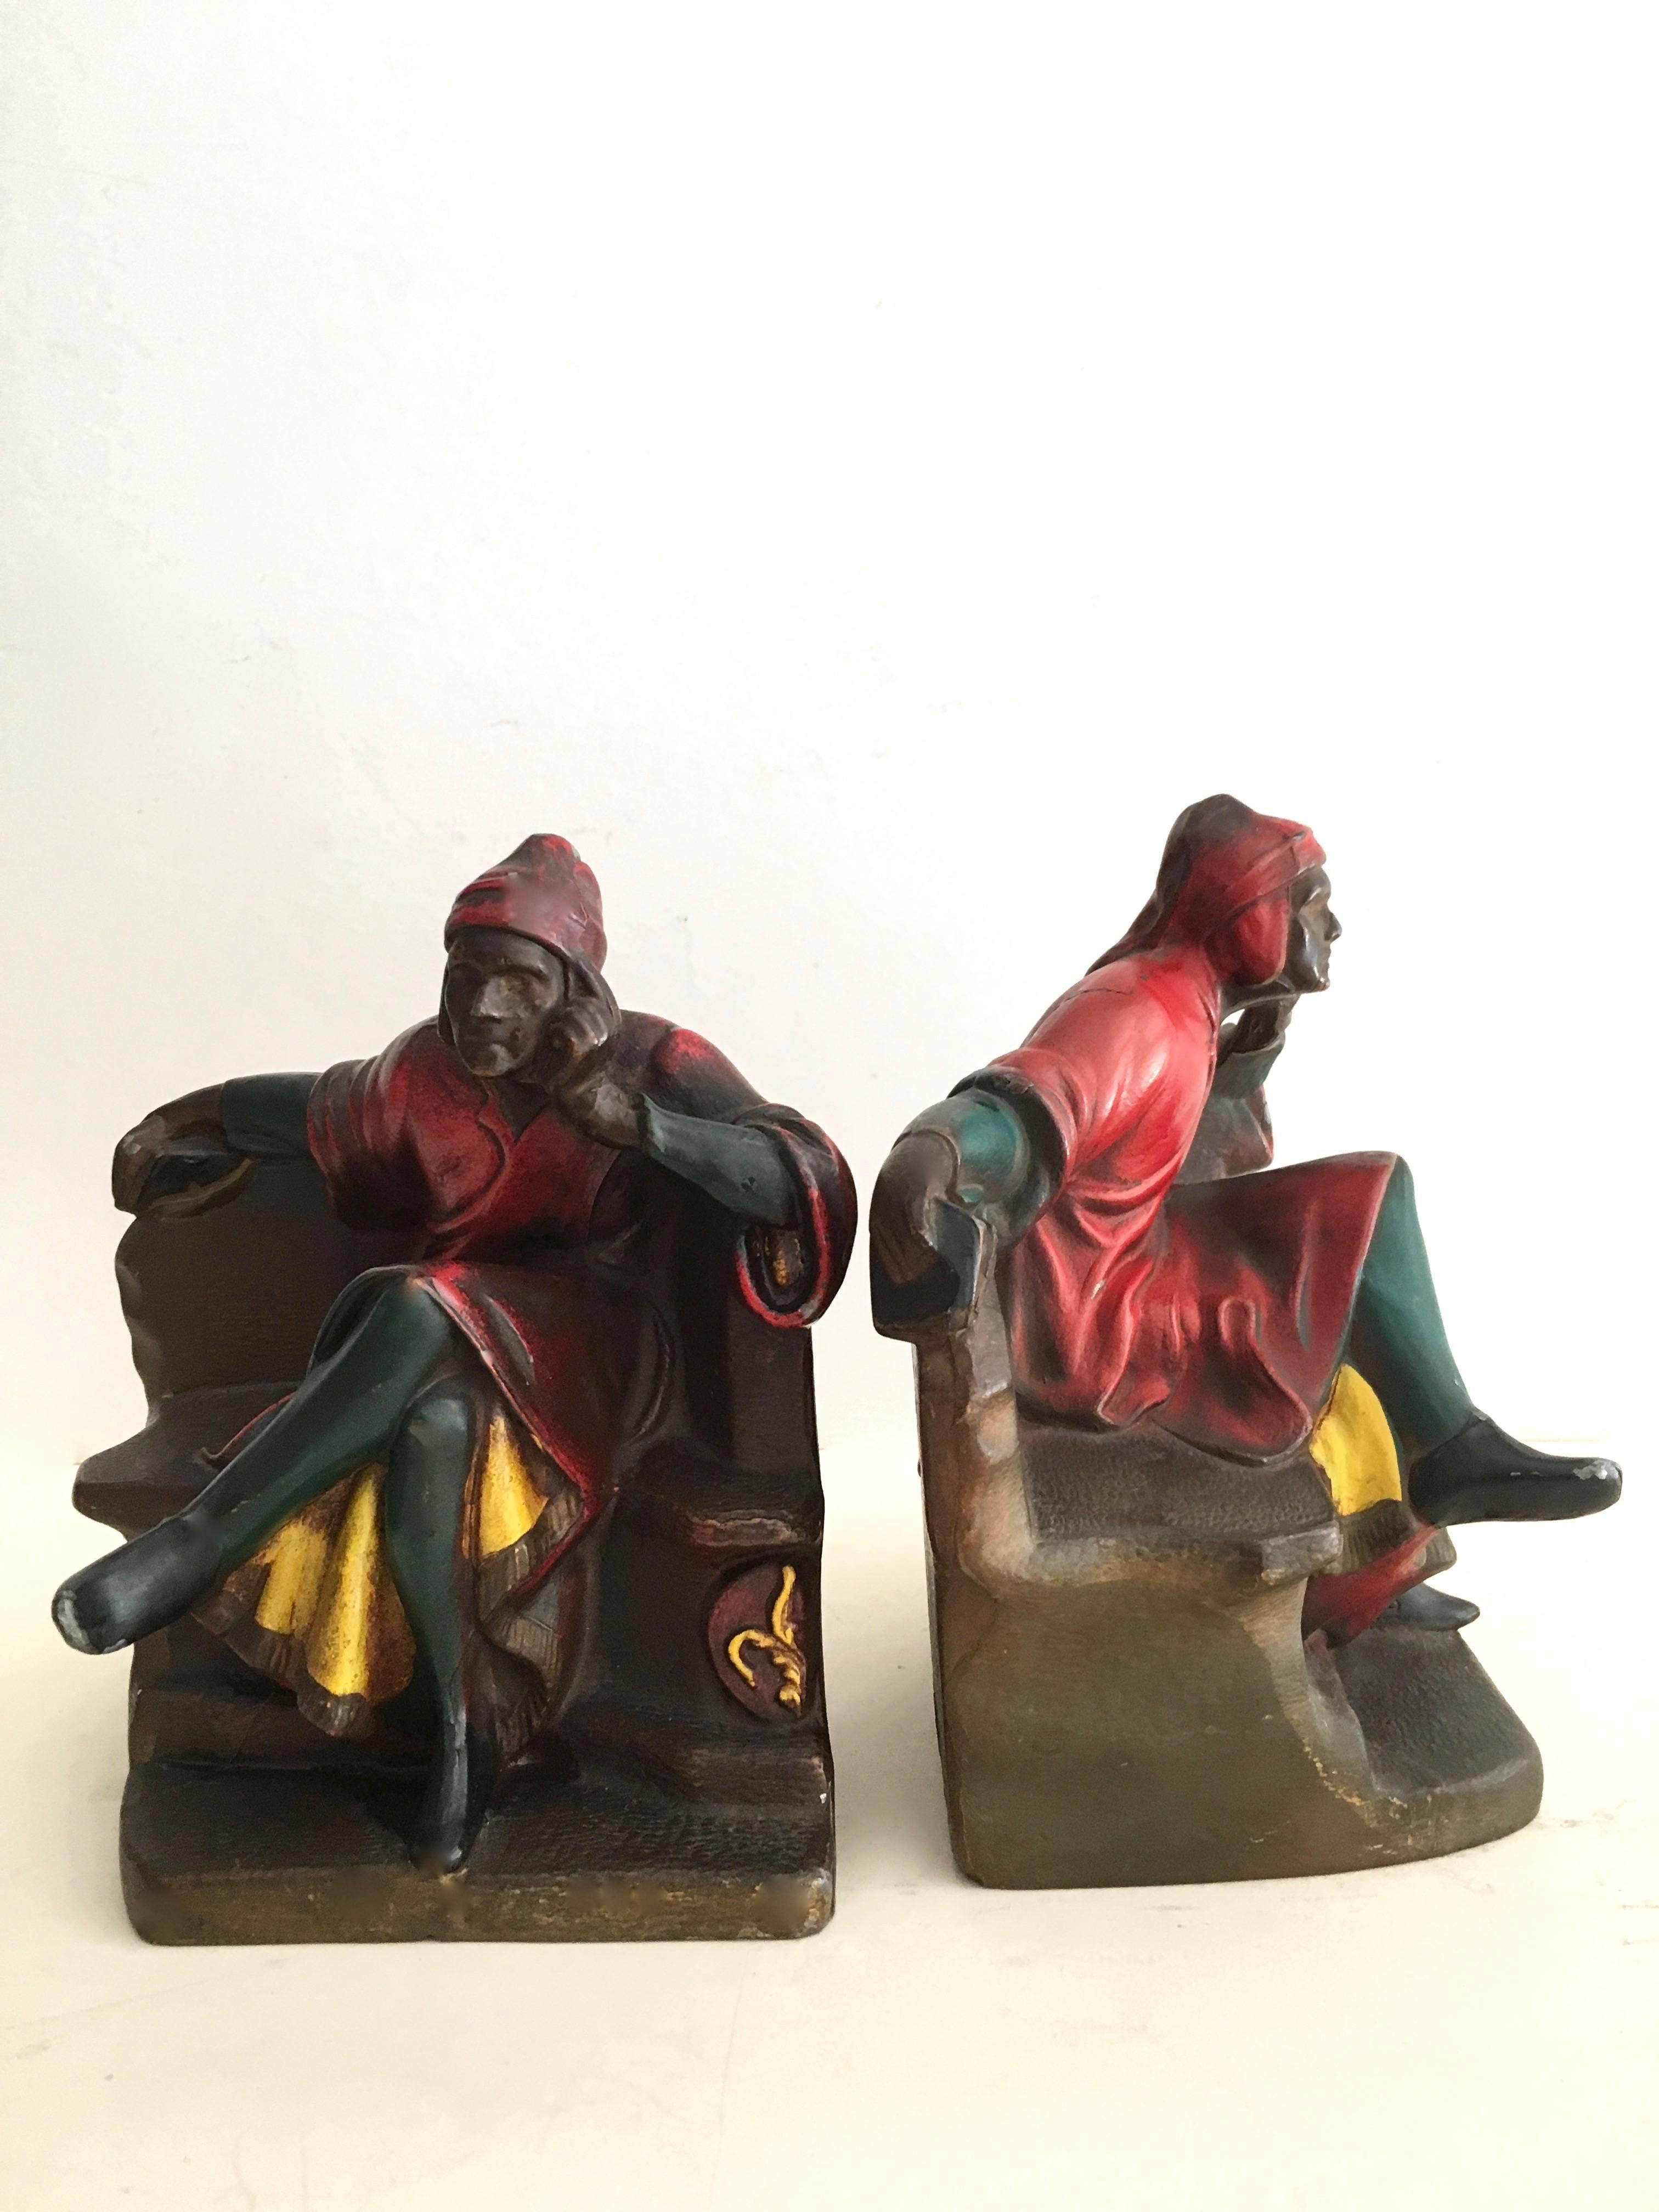 Pair of bookends depicting Dante:
Durante degli Alighieri, simply called Dante, circa 1265–1321), was a major Italian poet of the late middle ages. His divine comedy, originally called Comedìa and later christened Divina by Boccaccio, is widely